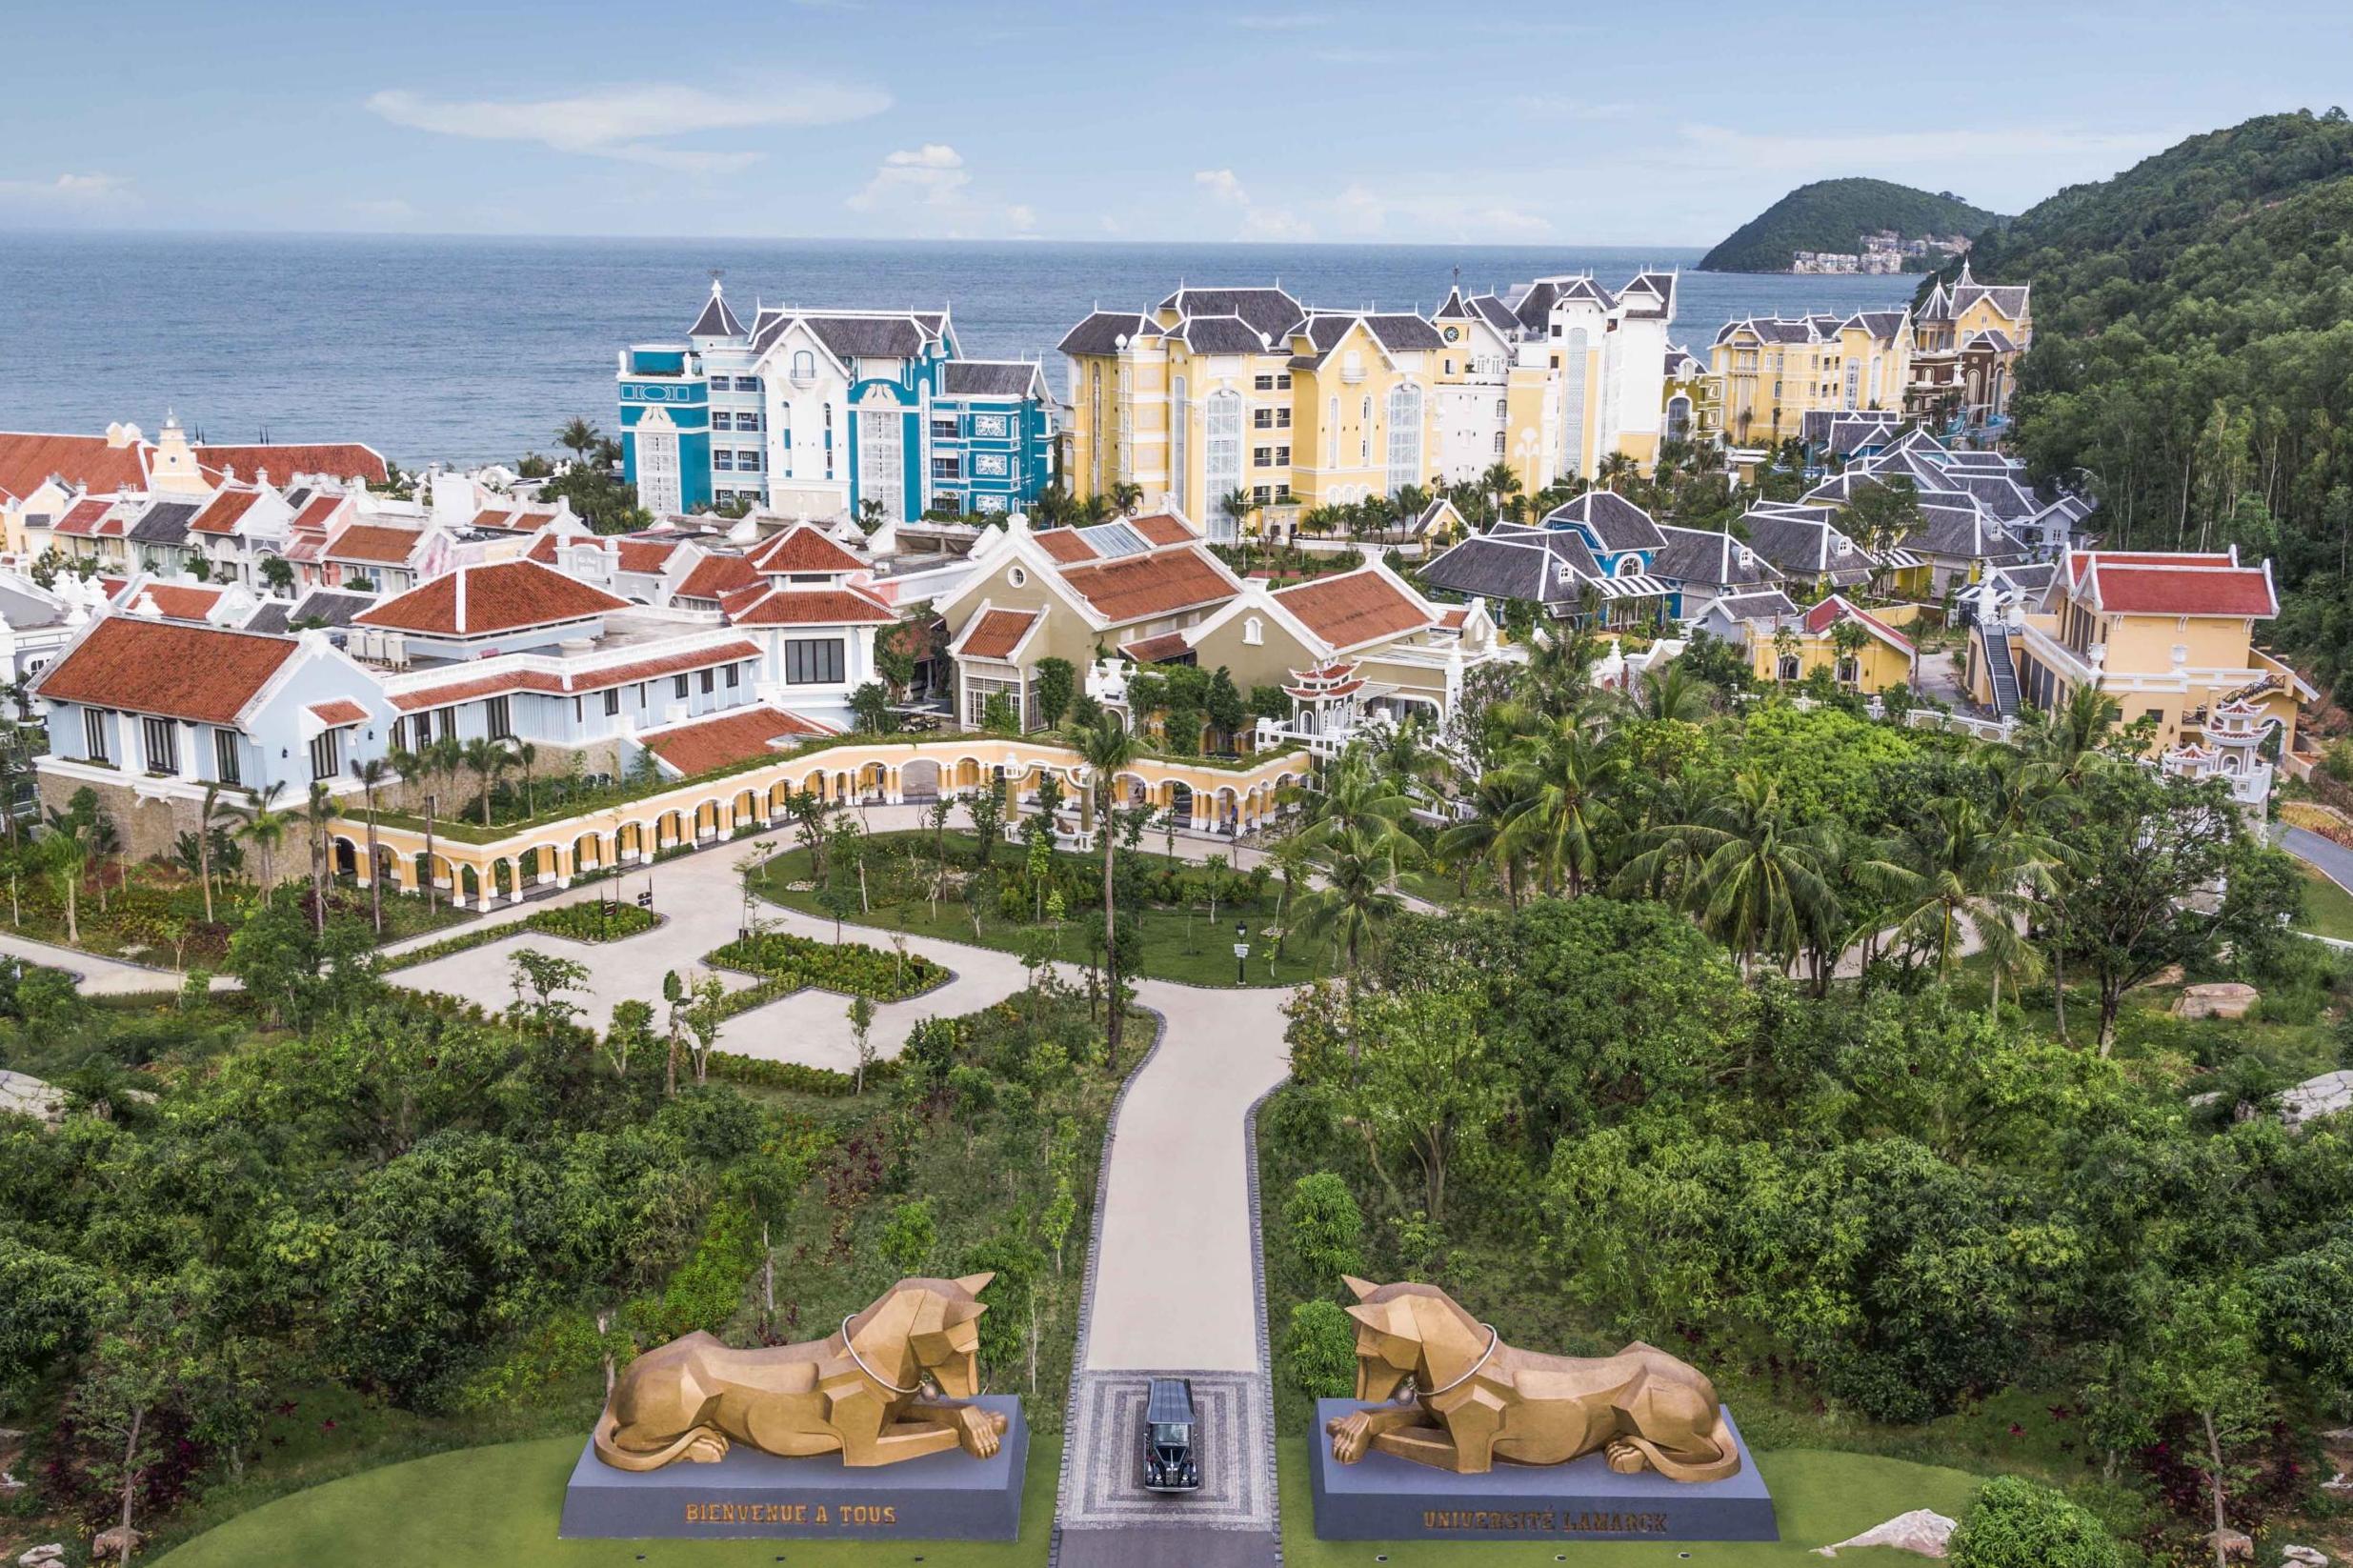 Hotel chains like JW Marriott have popped up in Phu Quoc